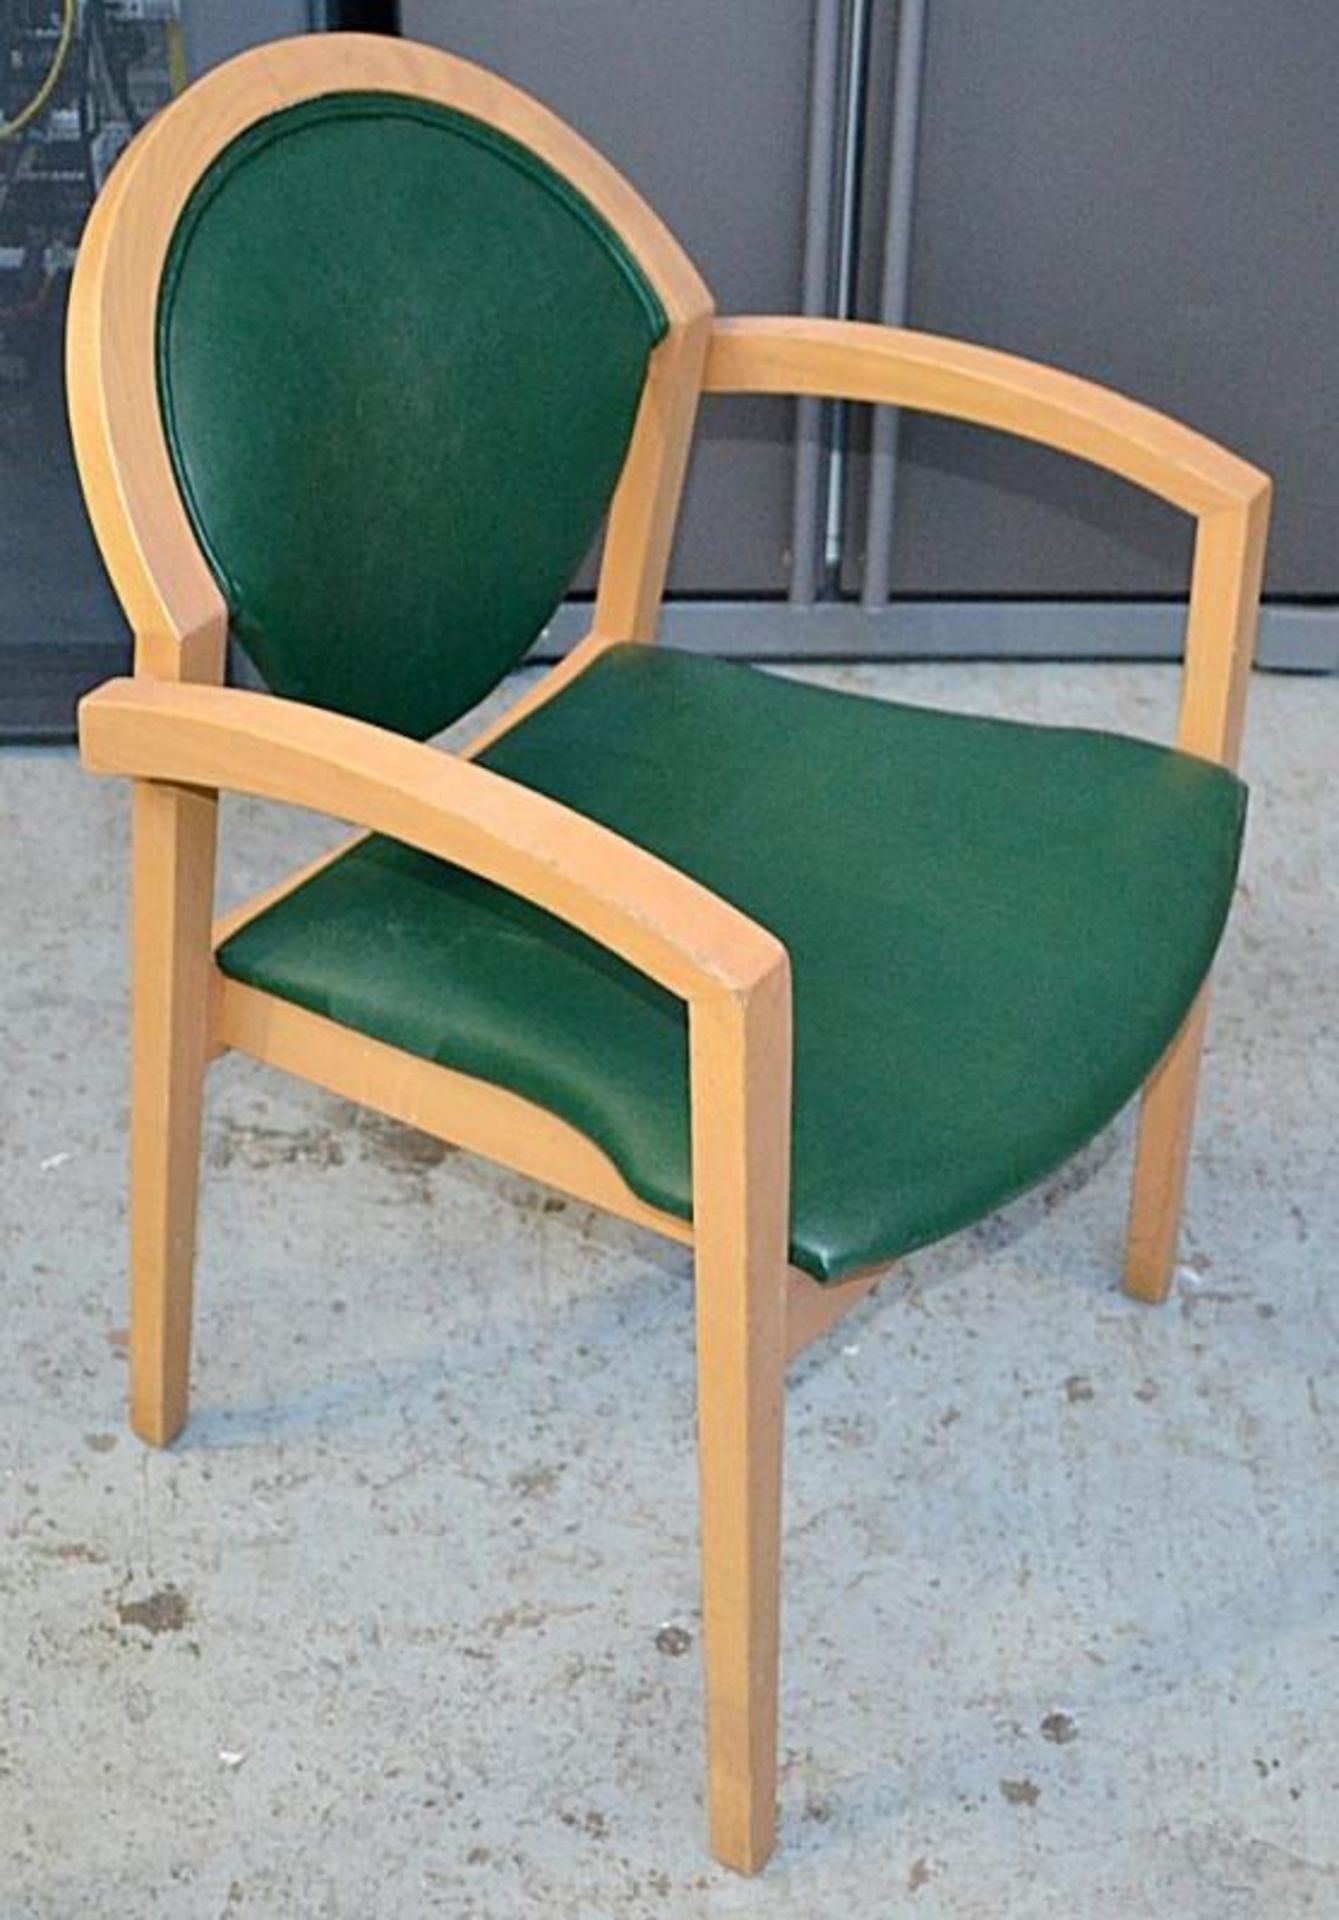 3 x Matching Wooden Chairs Upholstered Green Faux Leather - Dimensions: W57.5 x D50 x H86 x SH46cm - - Image 4 of 8